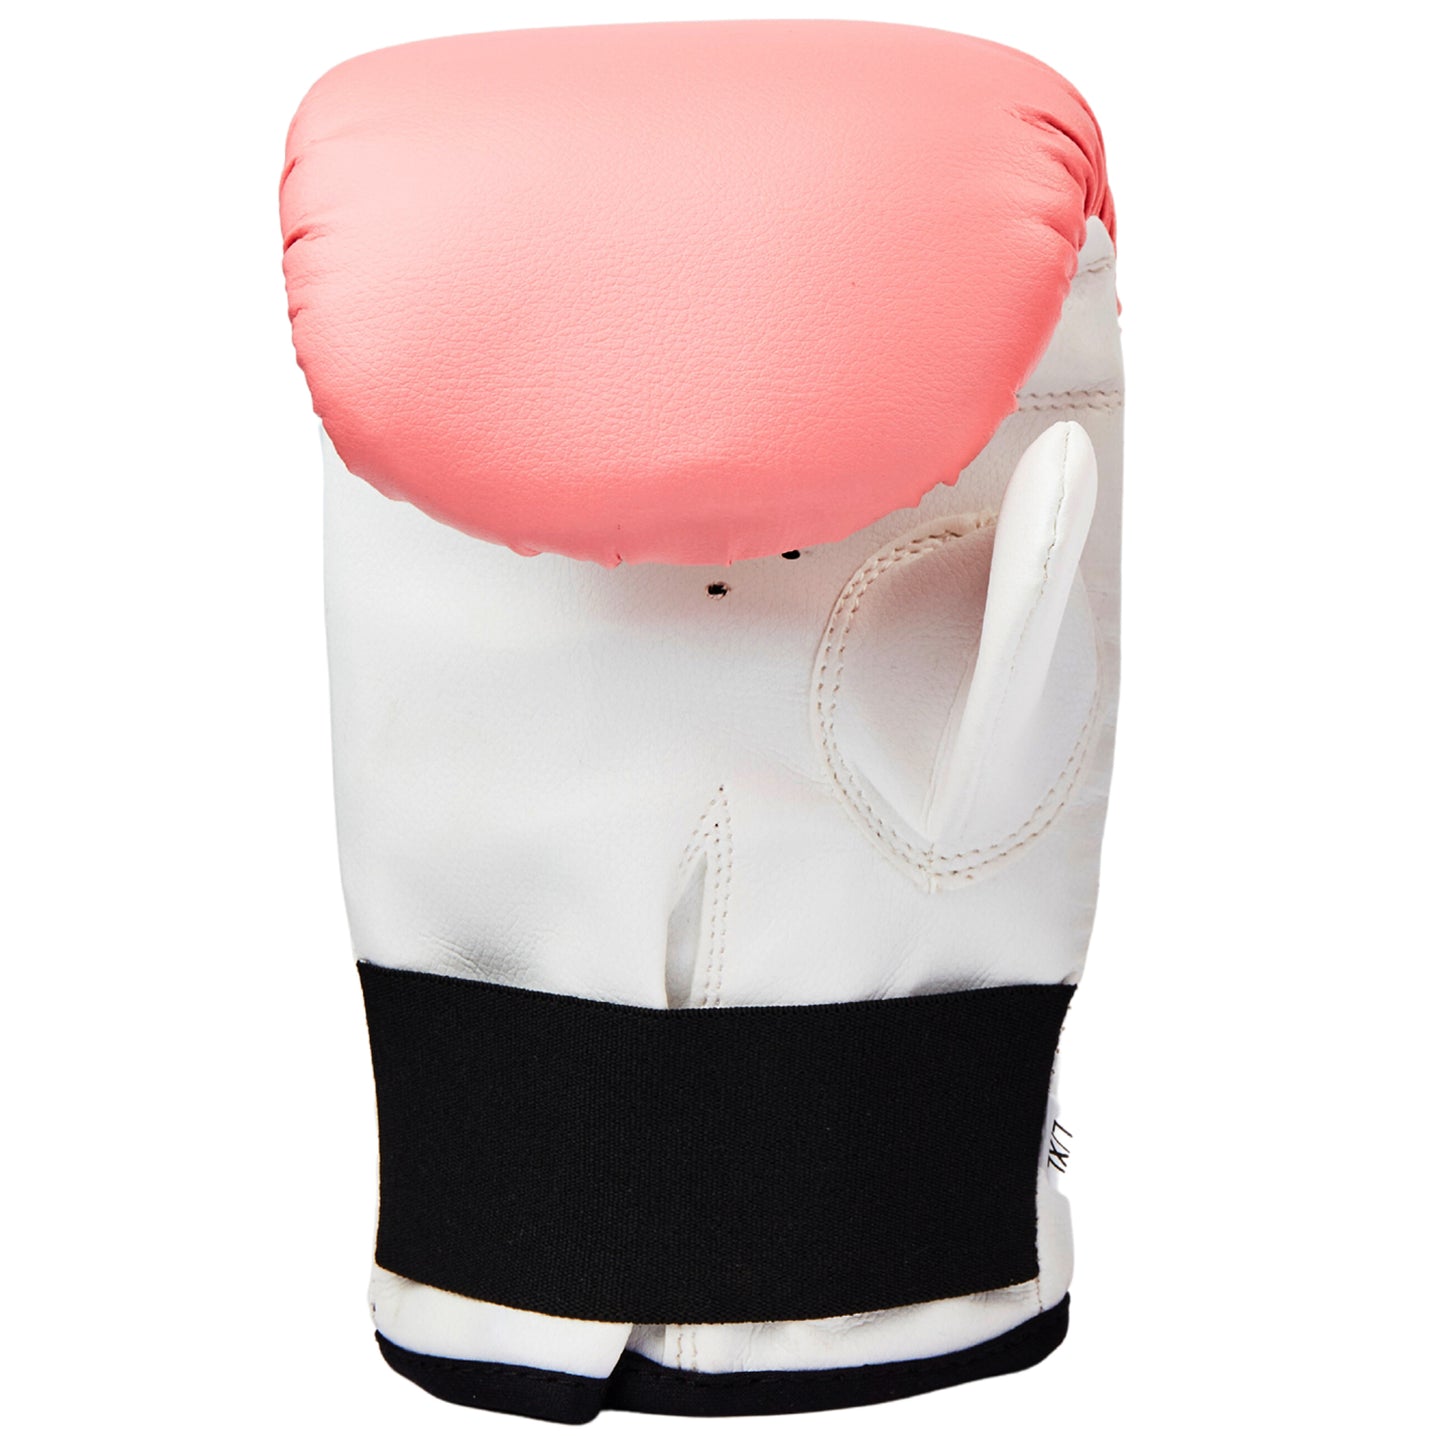 Boxing heavy bag mitts